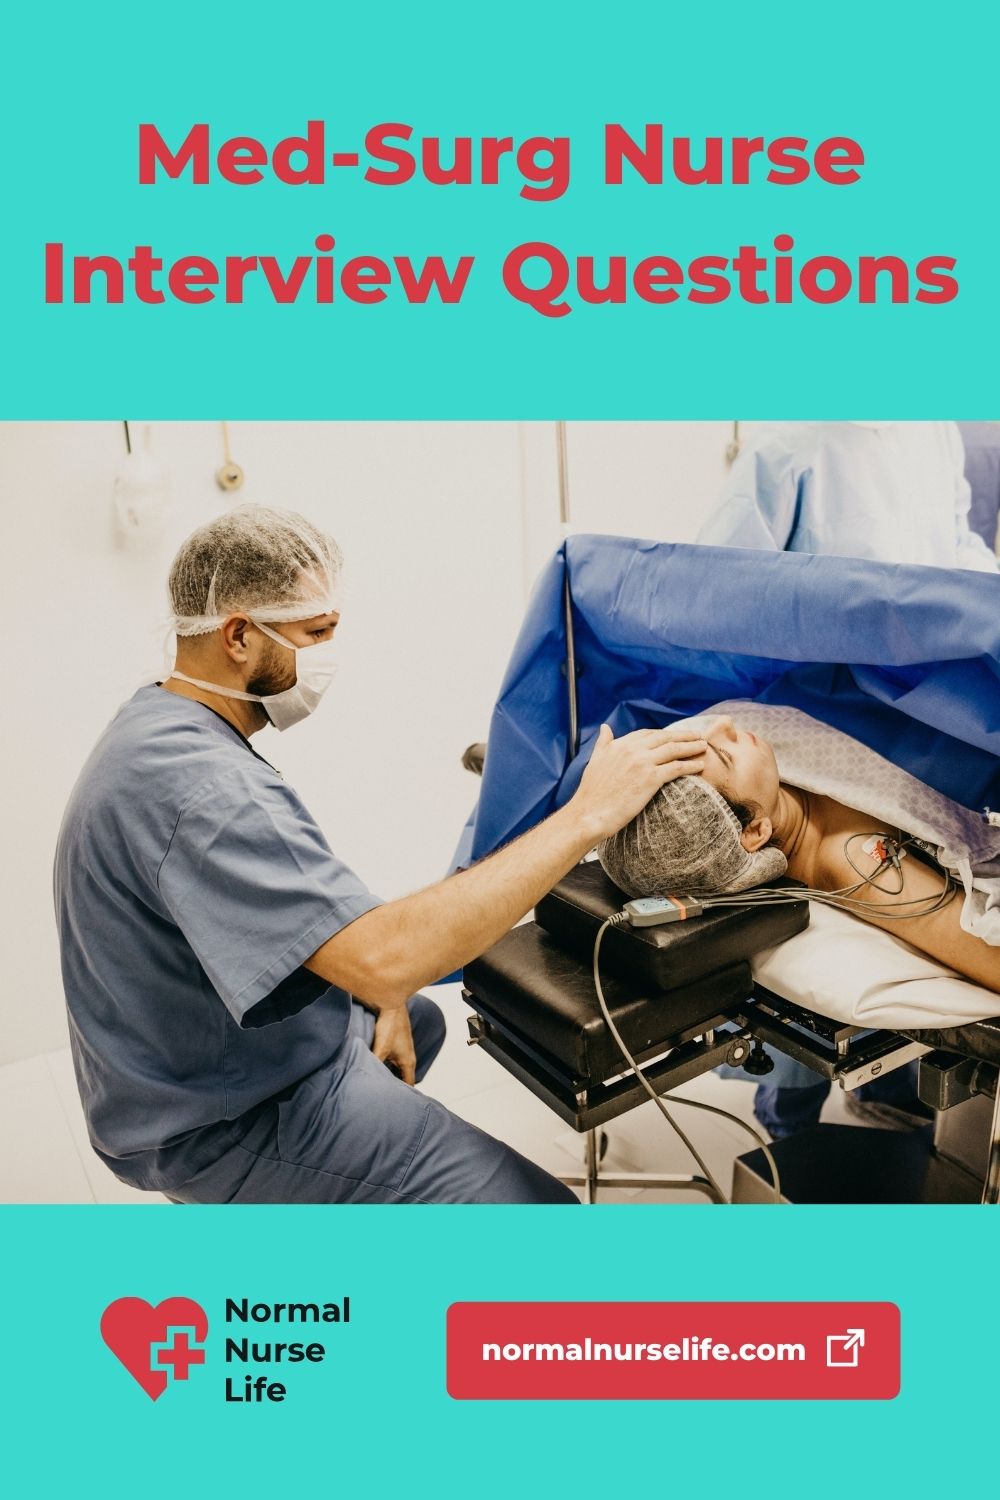 Medical-surgical nurse interview questions and answers